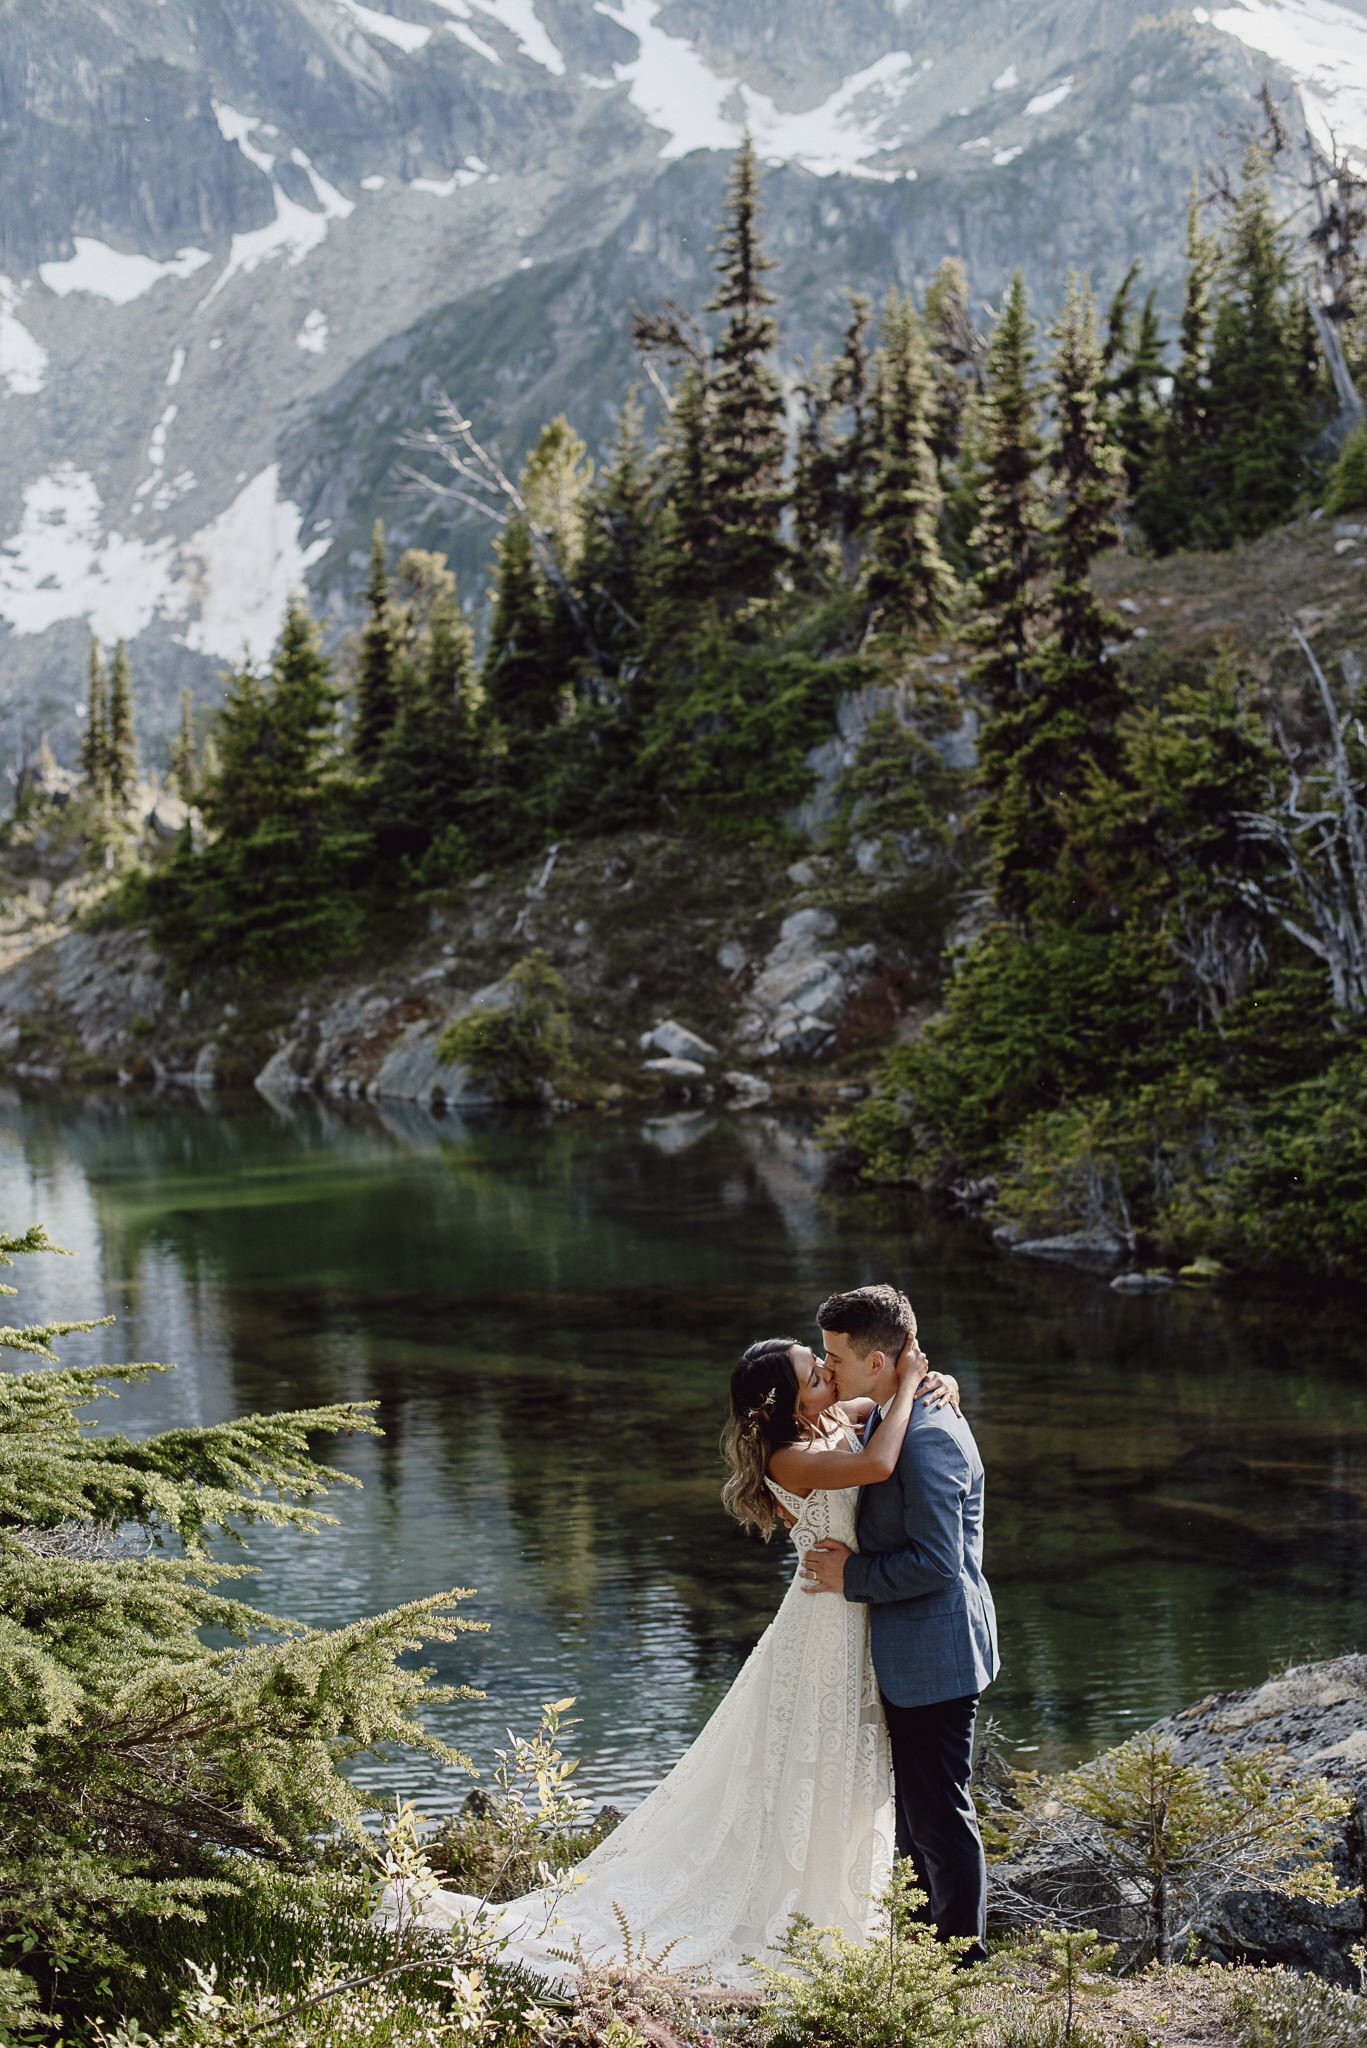 Charming-Pemberton-Helicopter-Elopement-SS-British-Columbia-Rocky-Mountain-Bride-37.jpg